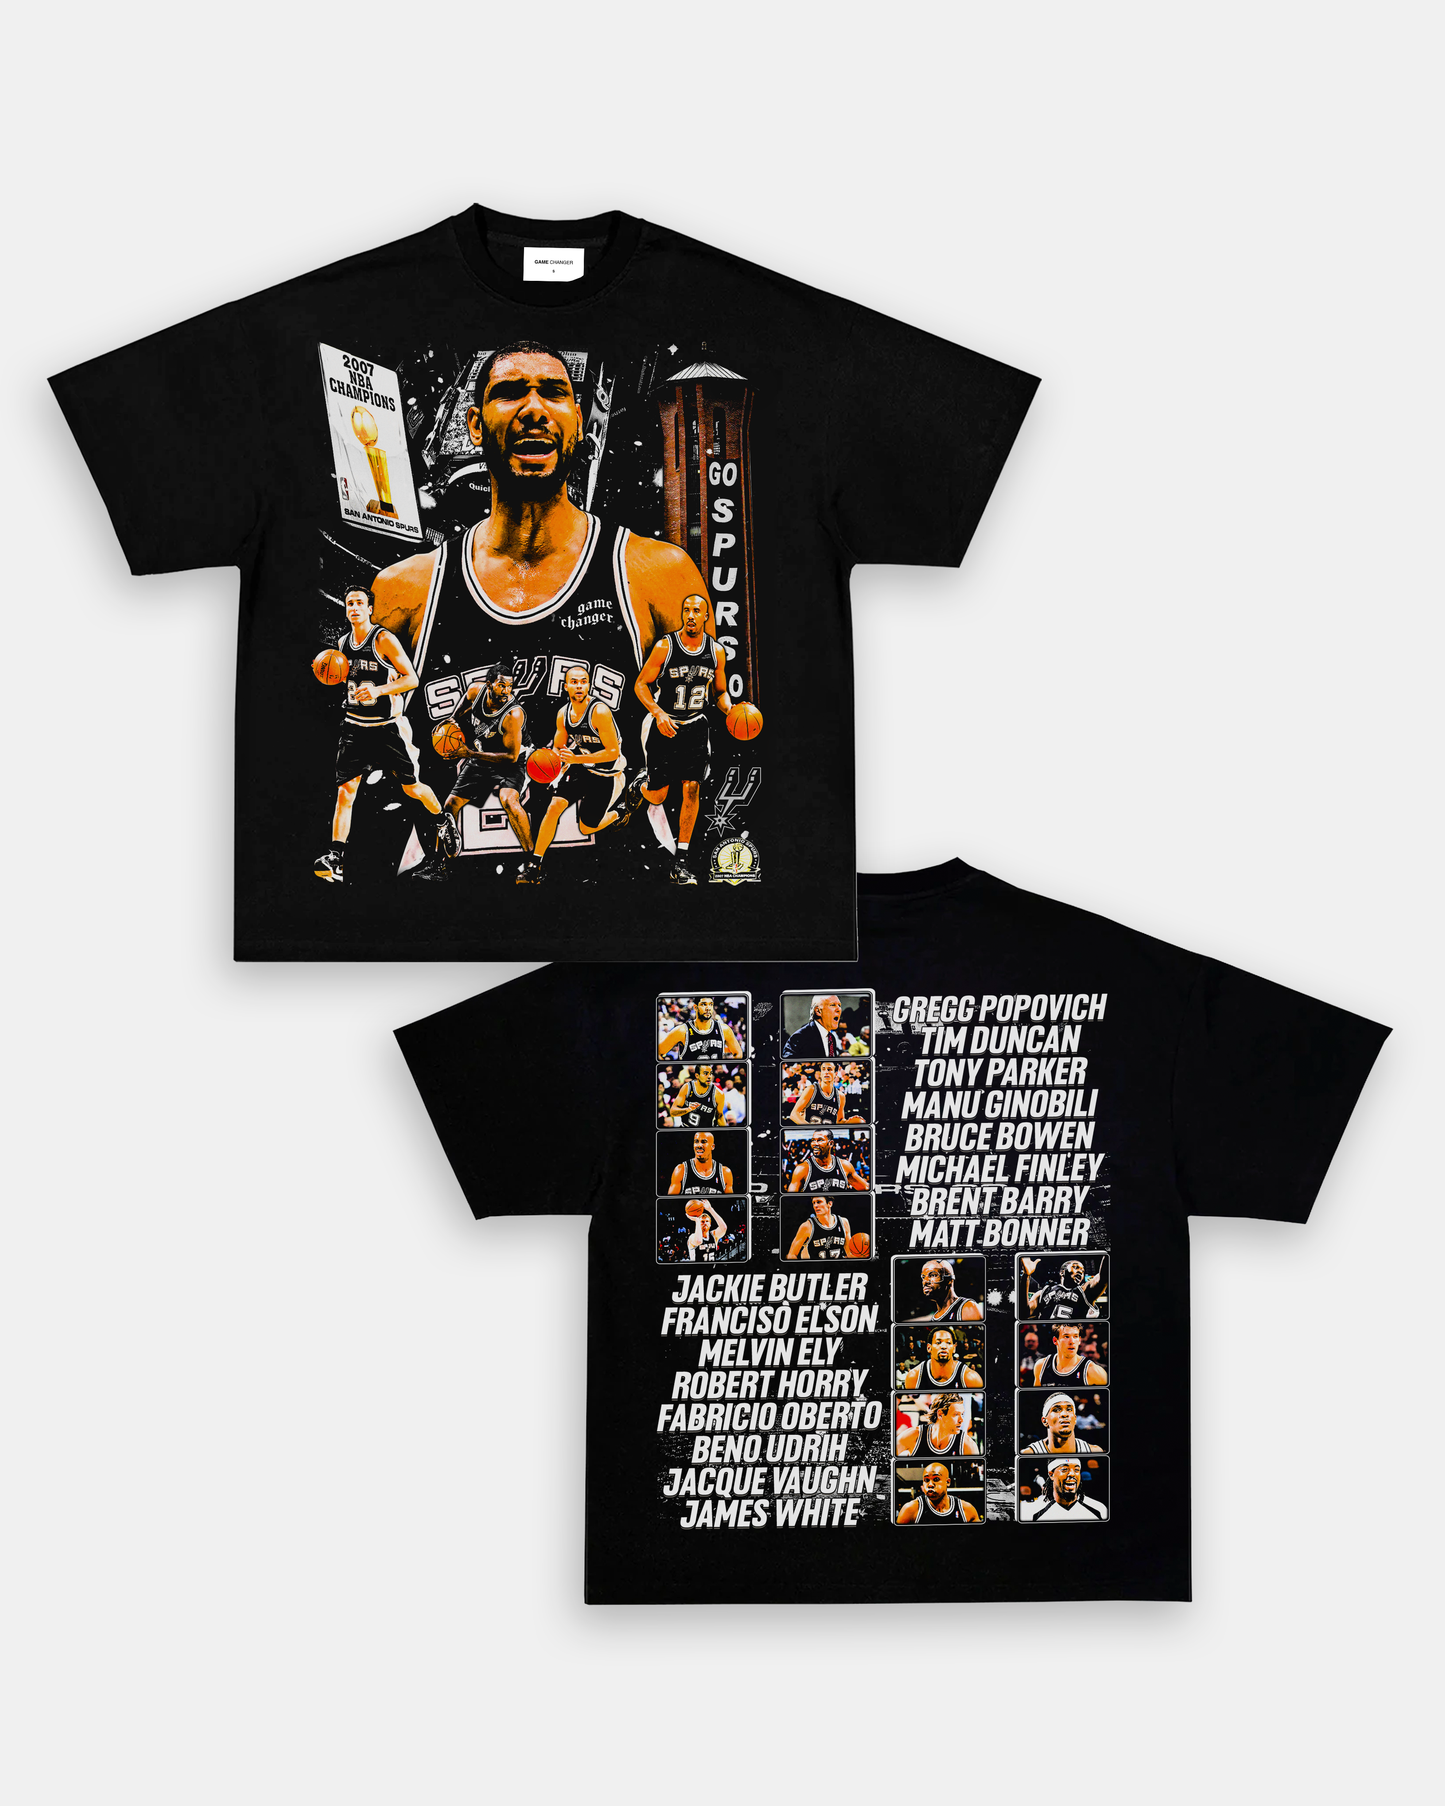 2007 NBA CHAMPS TEE - [DS]